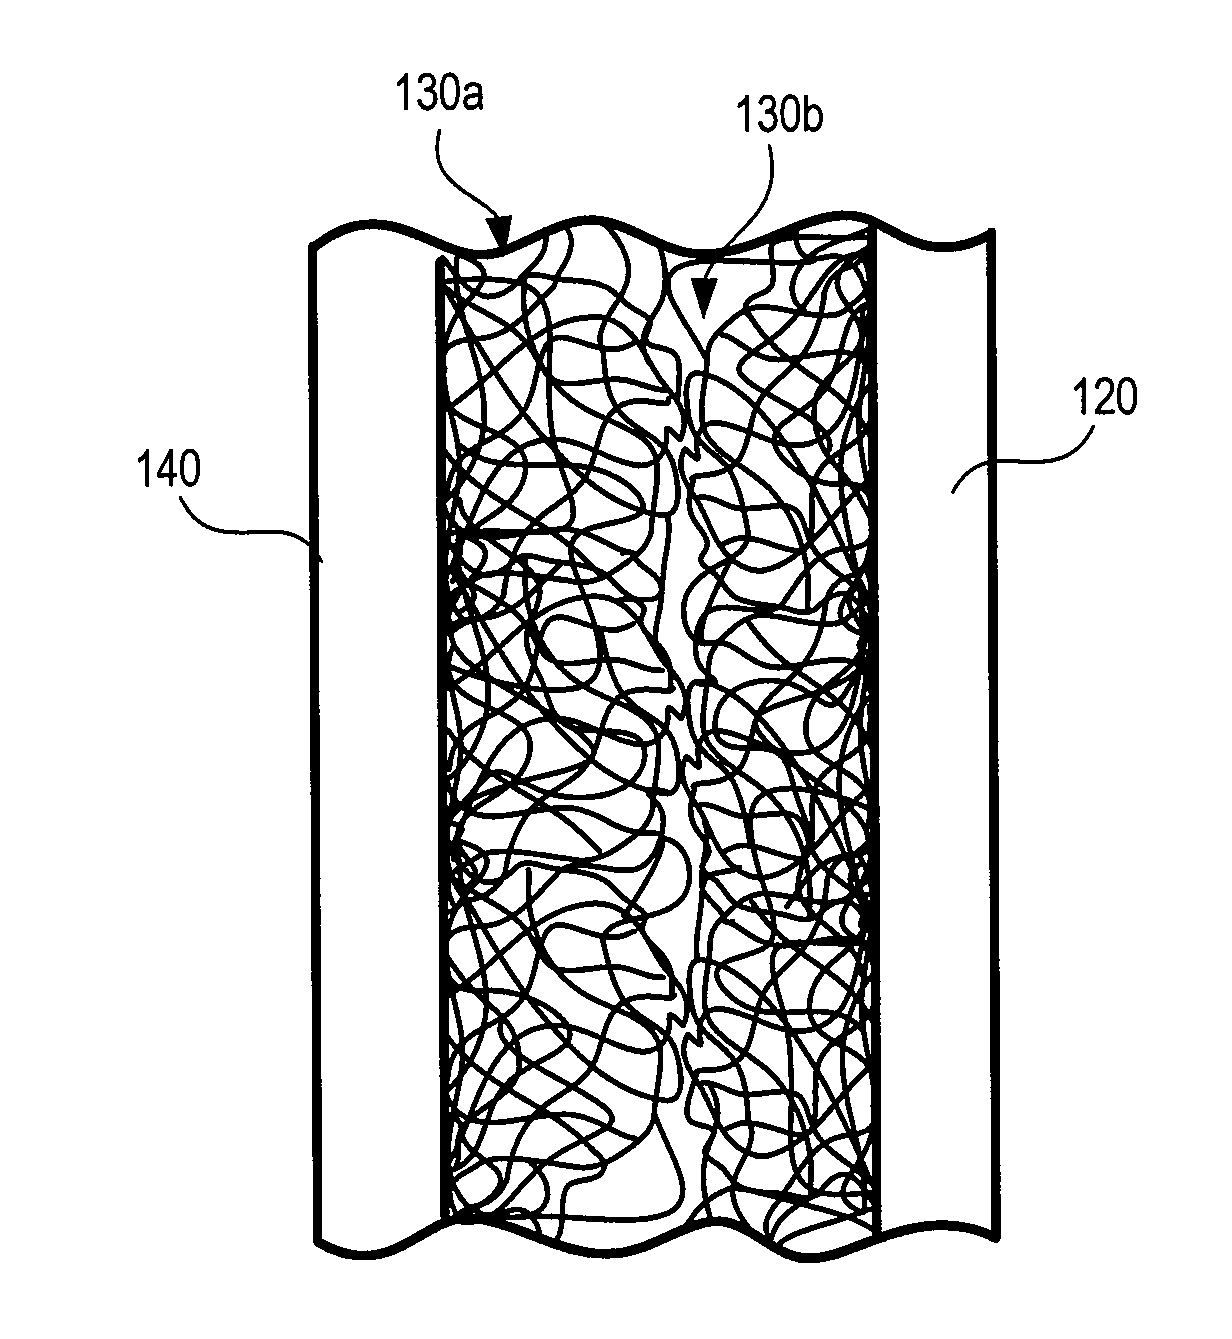 Multilayer laminate system and method used within building structures